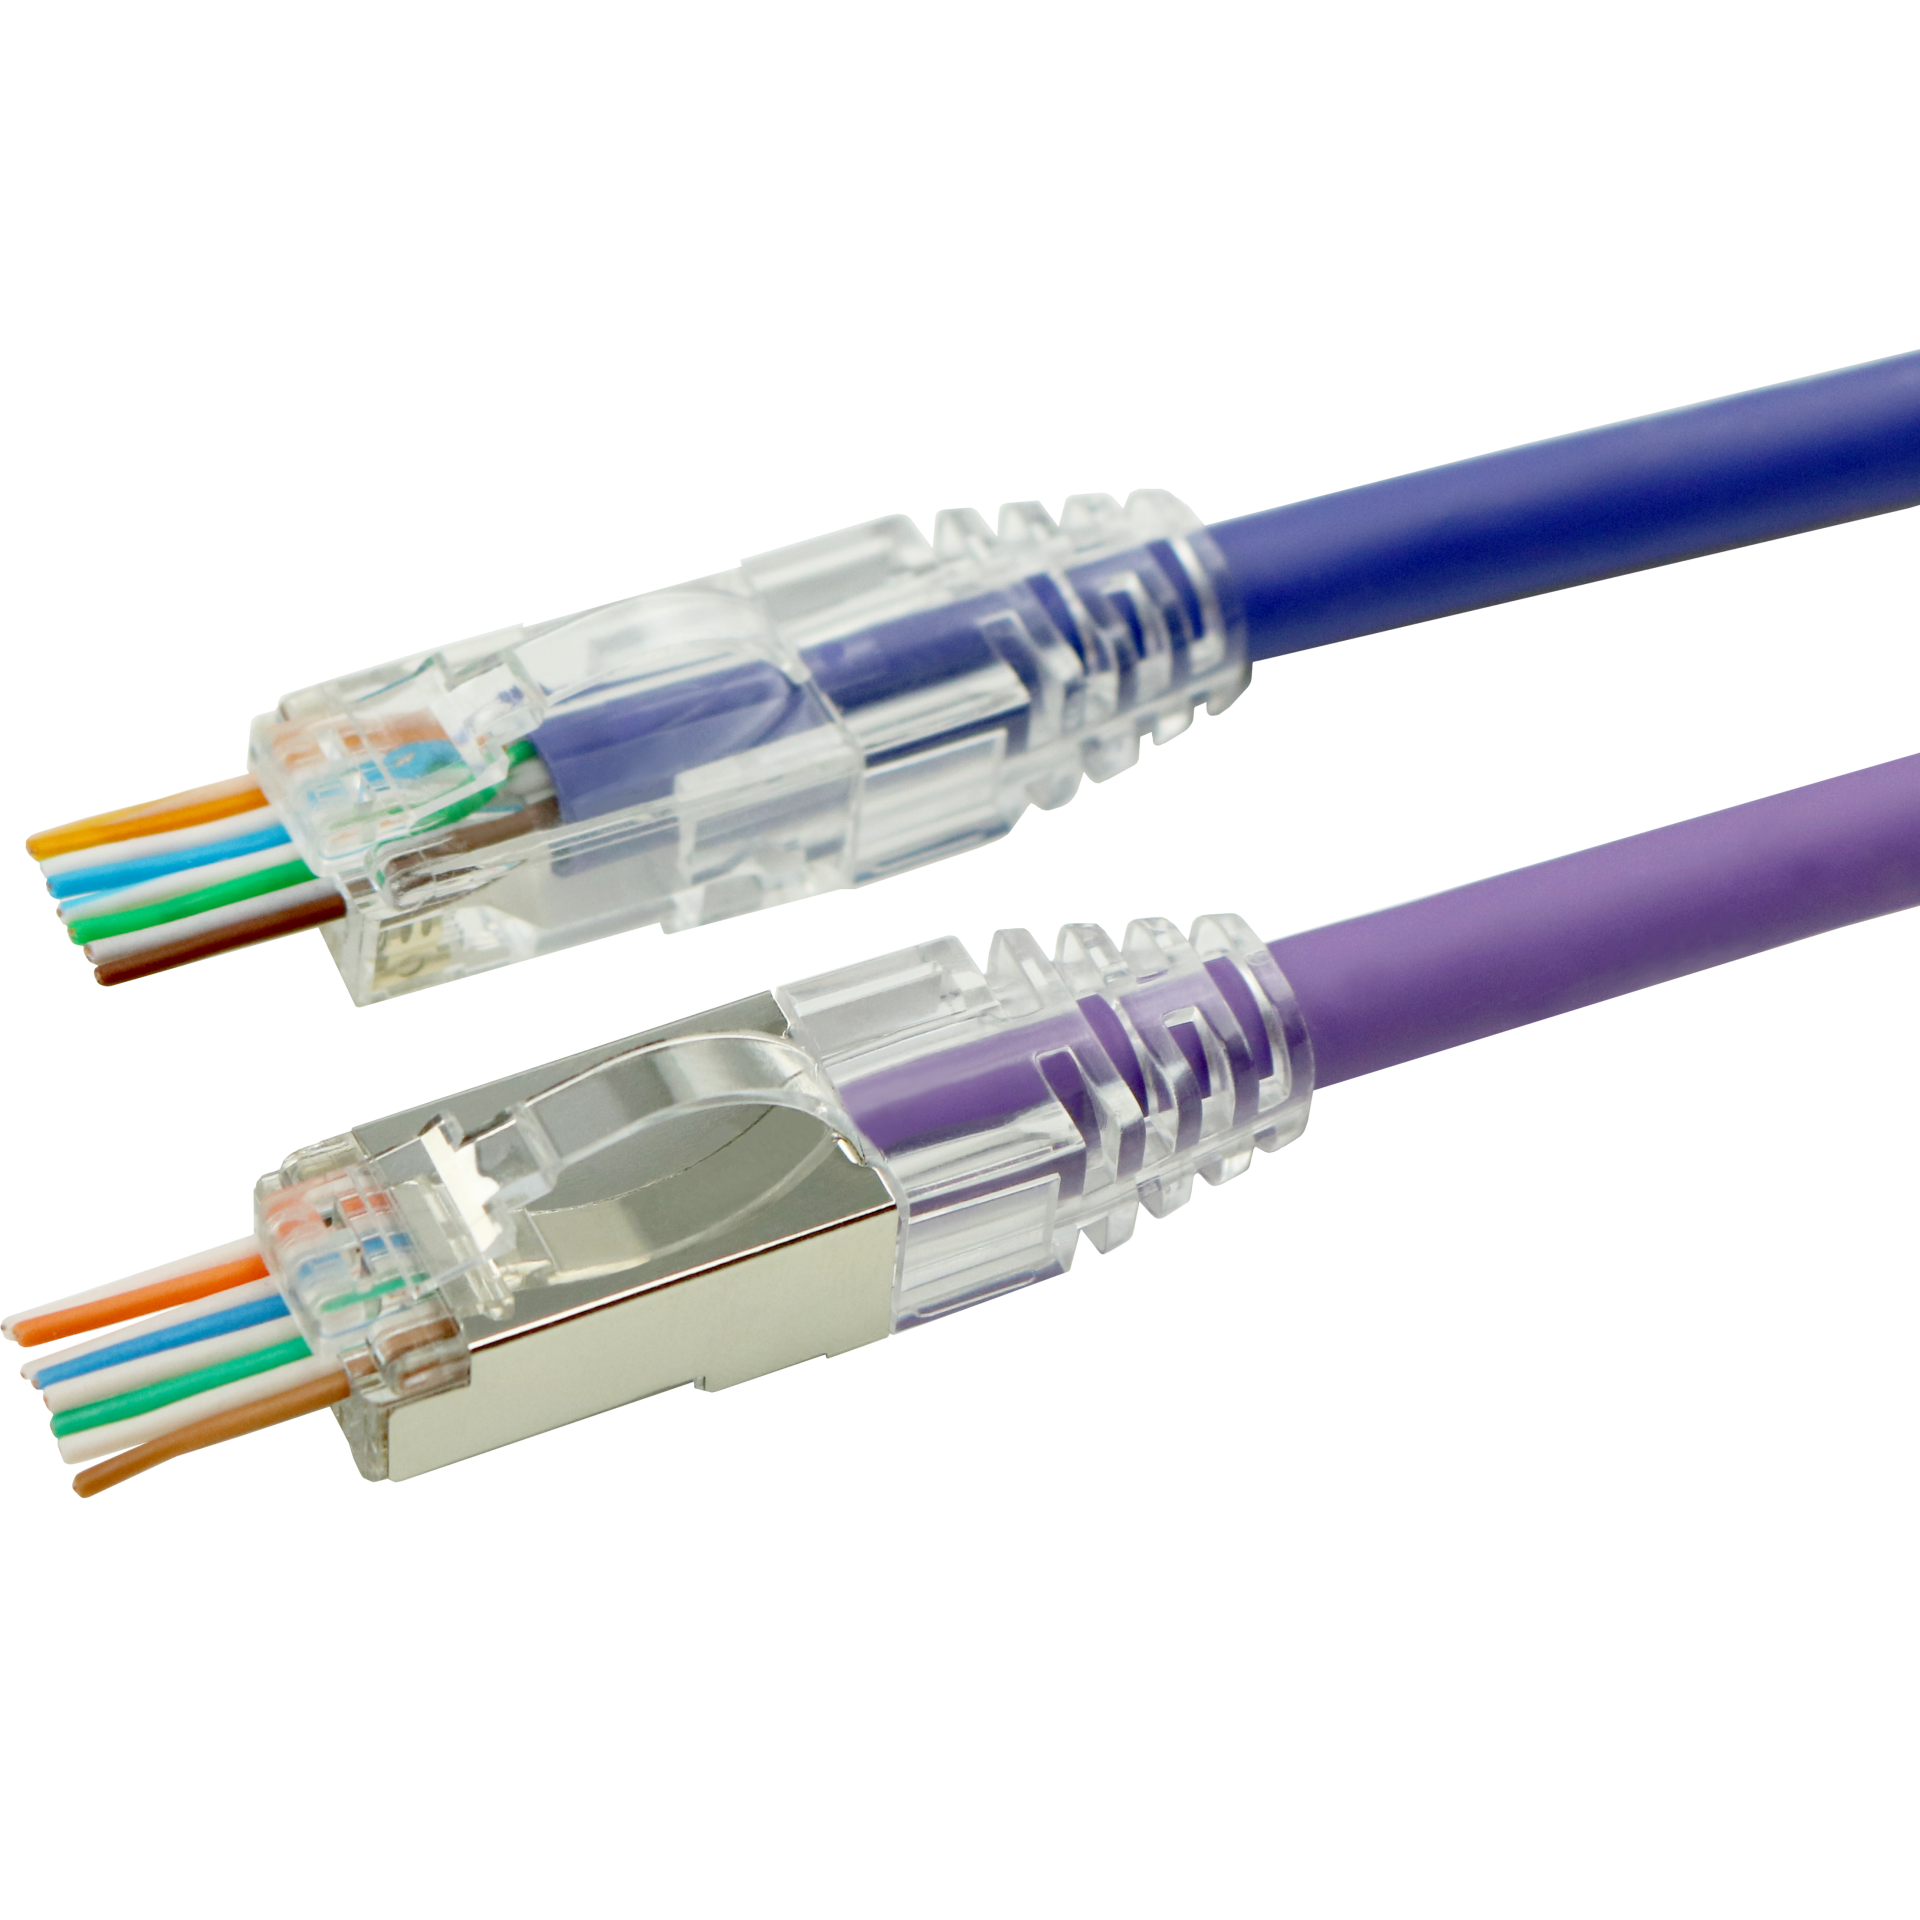 Ultra Clarity Cables Cat7 Ethernet Cable 25 Feet Rj45 Connector Double Shielded Stp 10 Gigabit 600mhz Premium High Speed Network Wire Patch Cable 7 5m Lan Cord 25 Feet Walmart Com Walmart Com